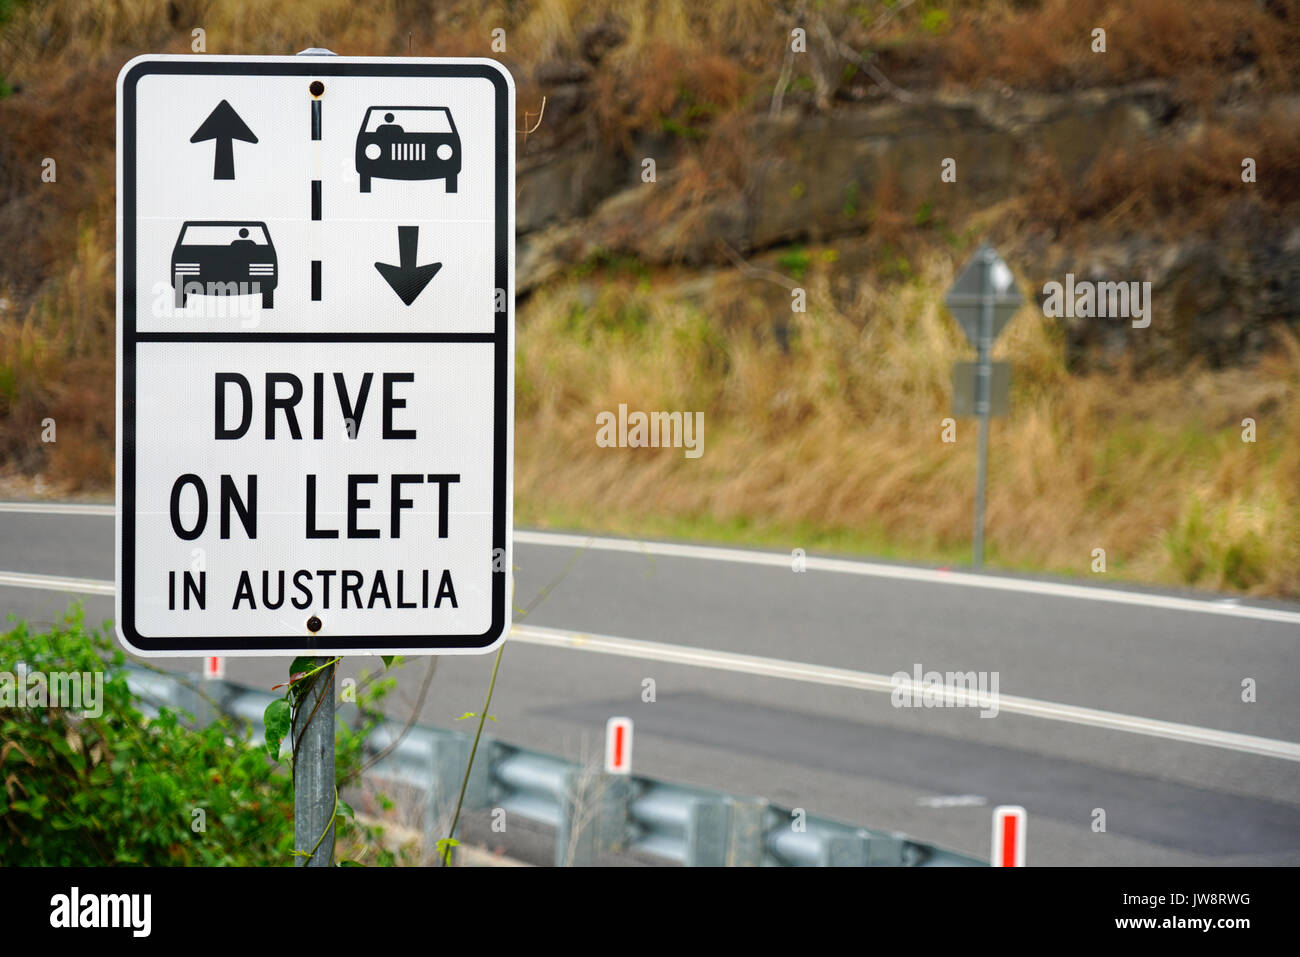 Road sign warning drivers to Drive on Left in Australia. Stock Photo